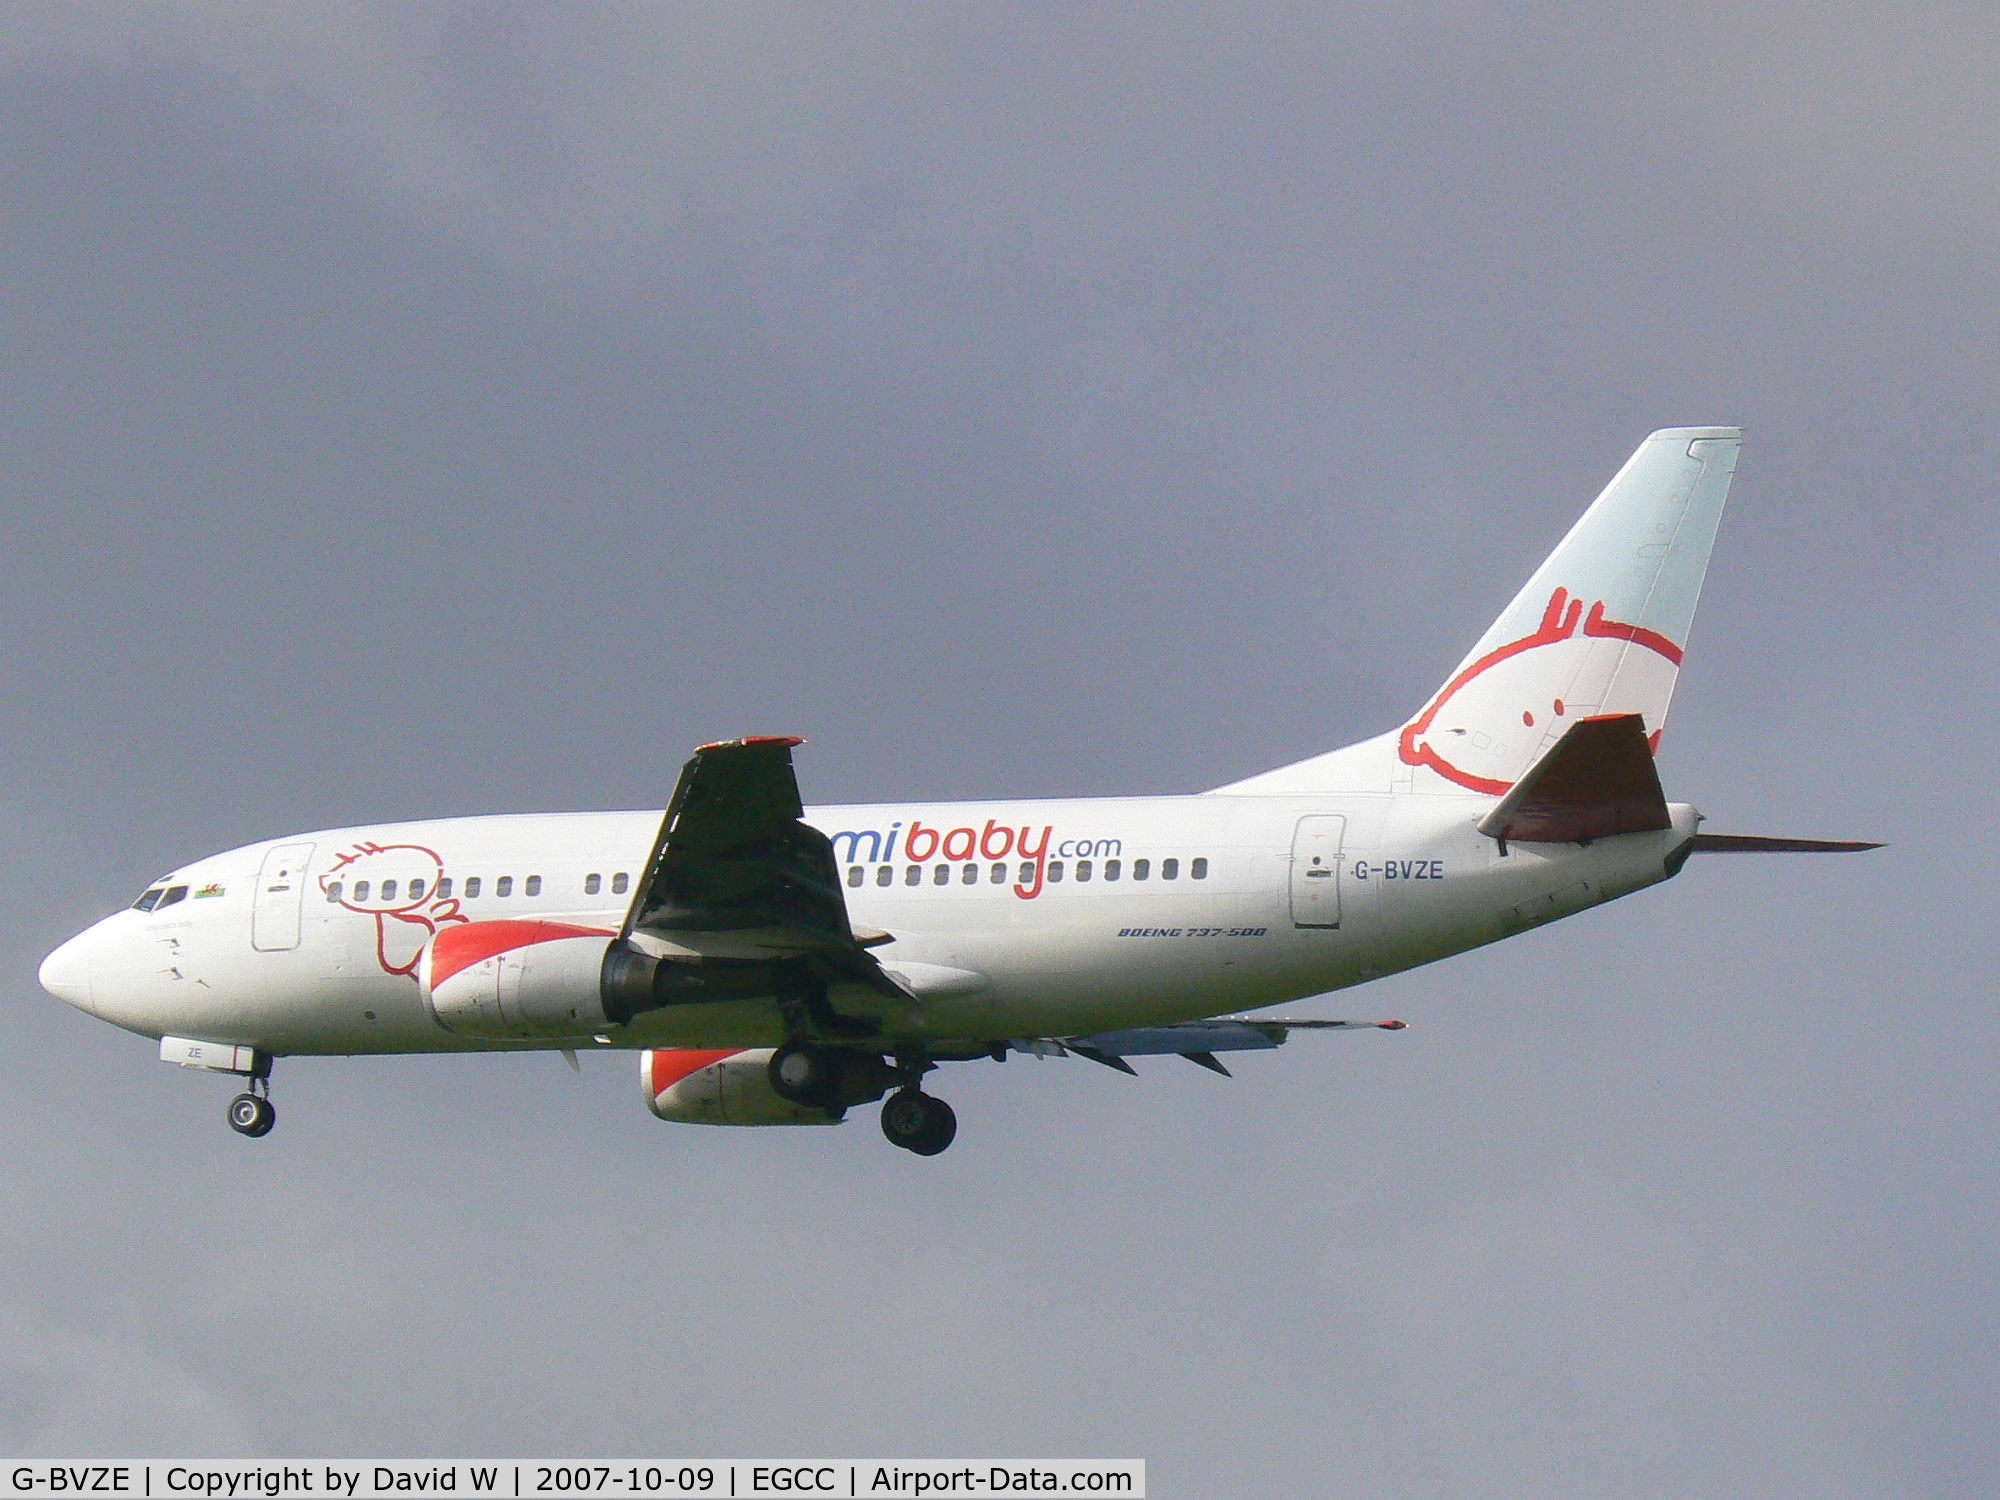 G-BVZE, 1993 Boeing 737-59D C/N 26422, Just about to land at Manchester.